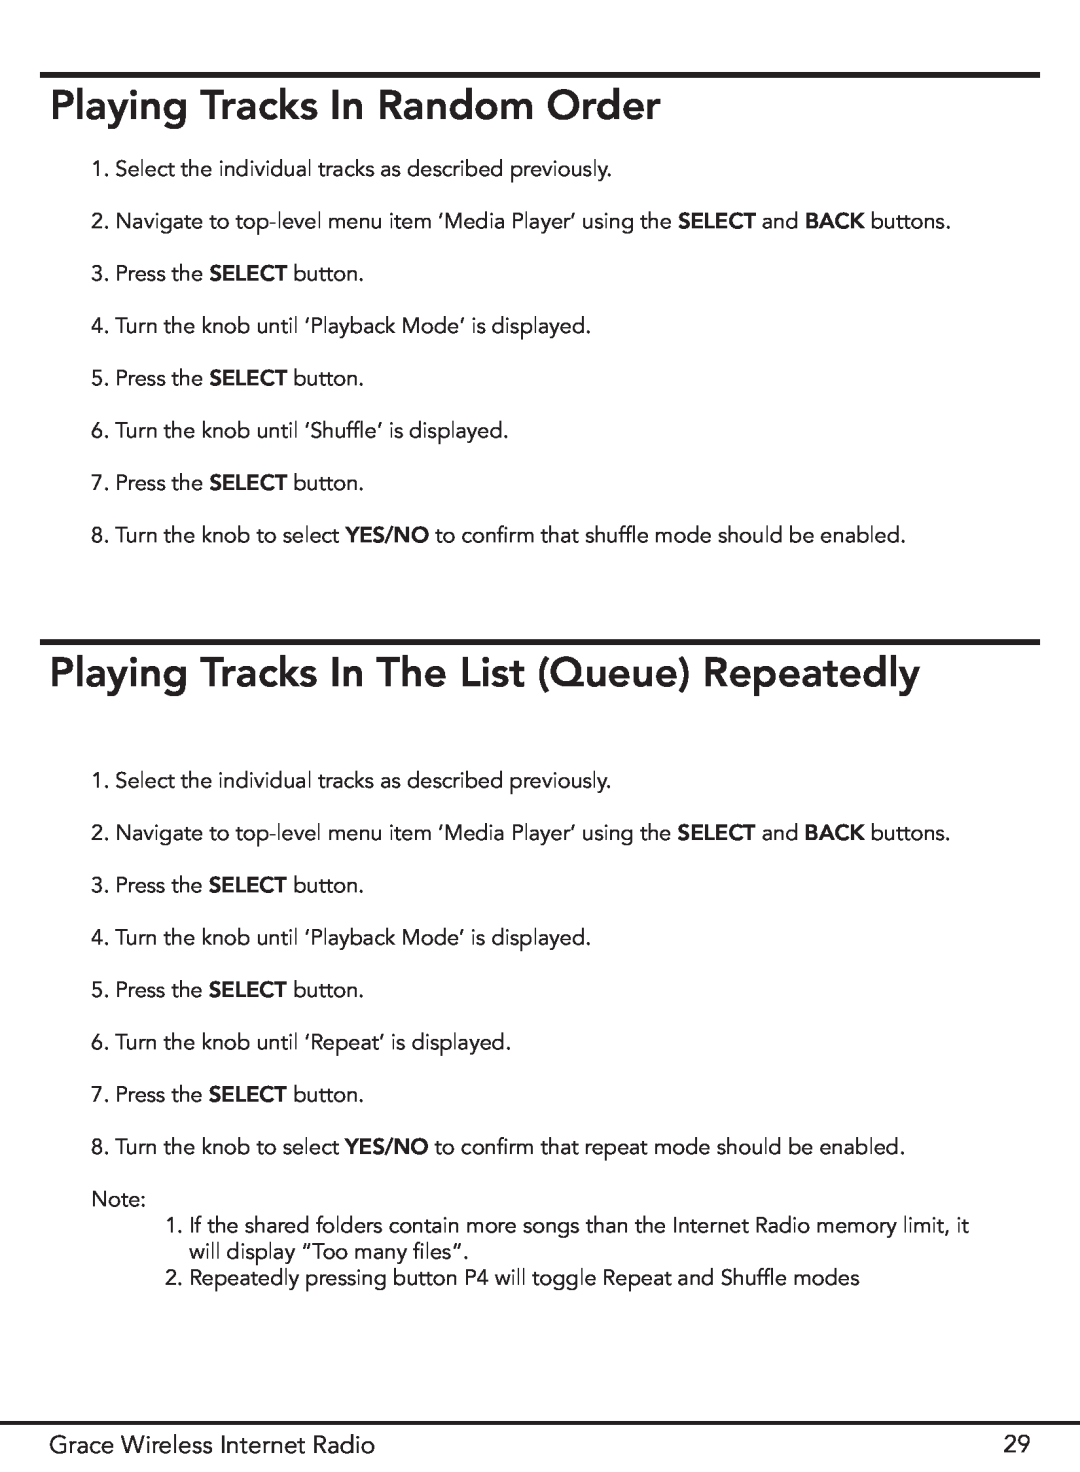 Grace GDI-IR2000 manual Playing Tracks In Random Order, Playing Tracks In The List Queue Repeatedly 